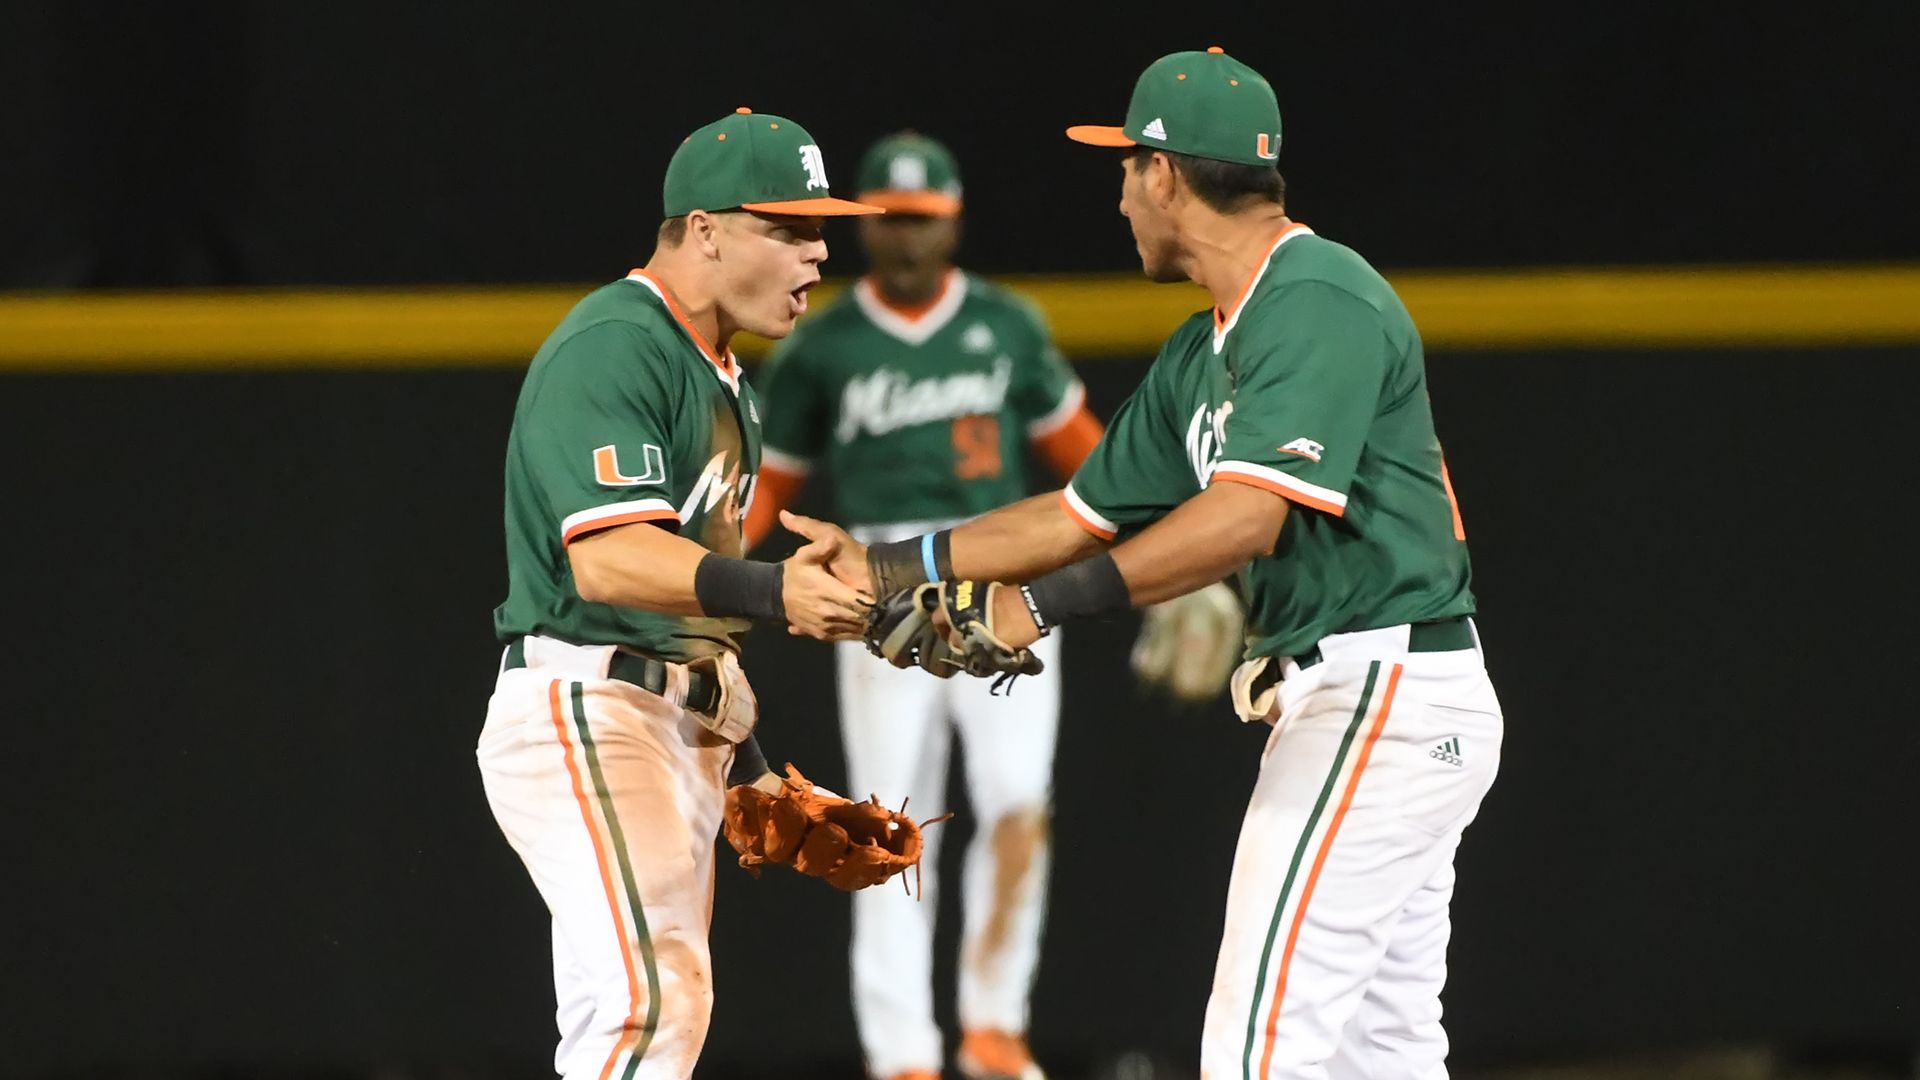 Canes Find a Way to Finish on Opening Night